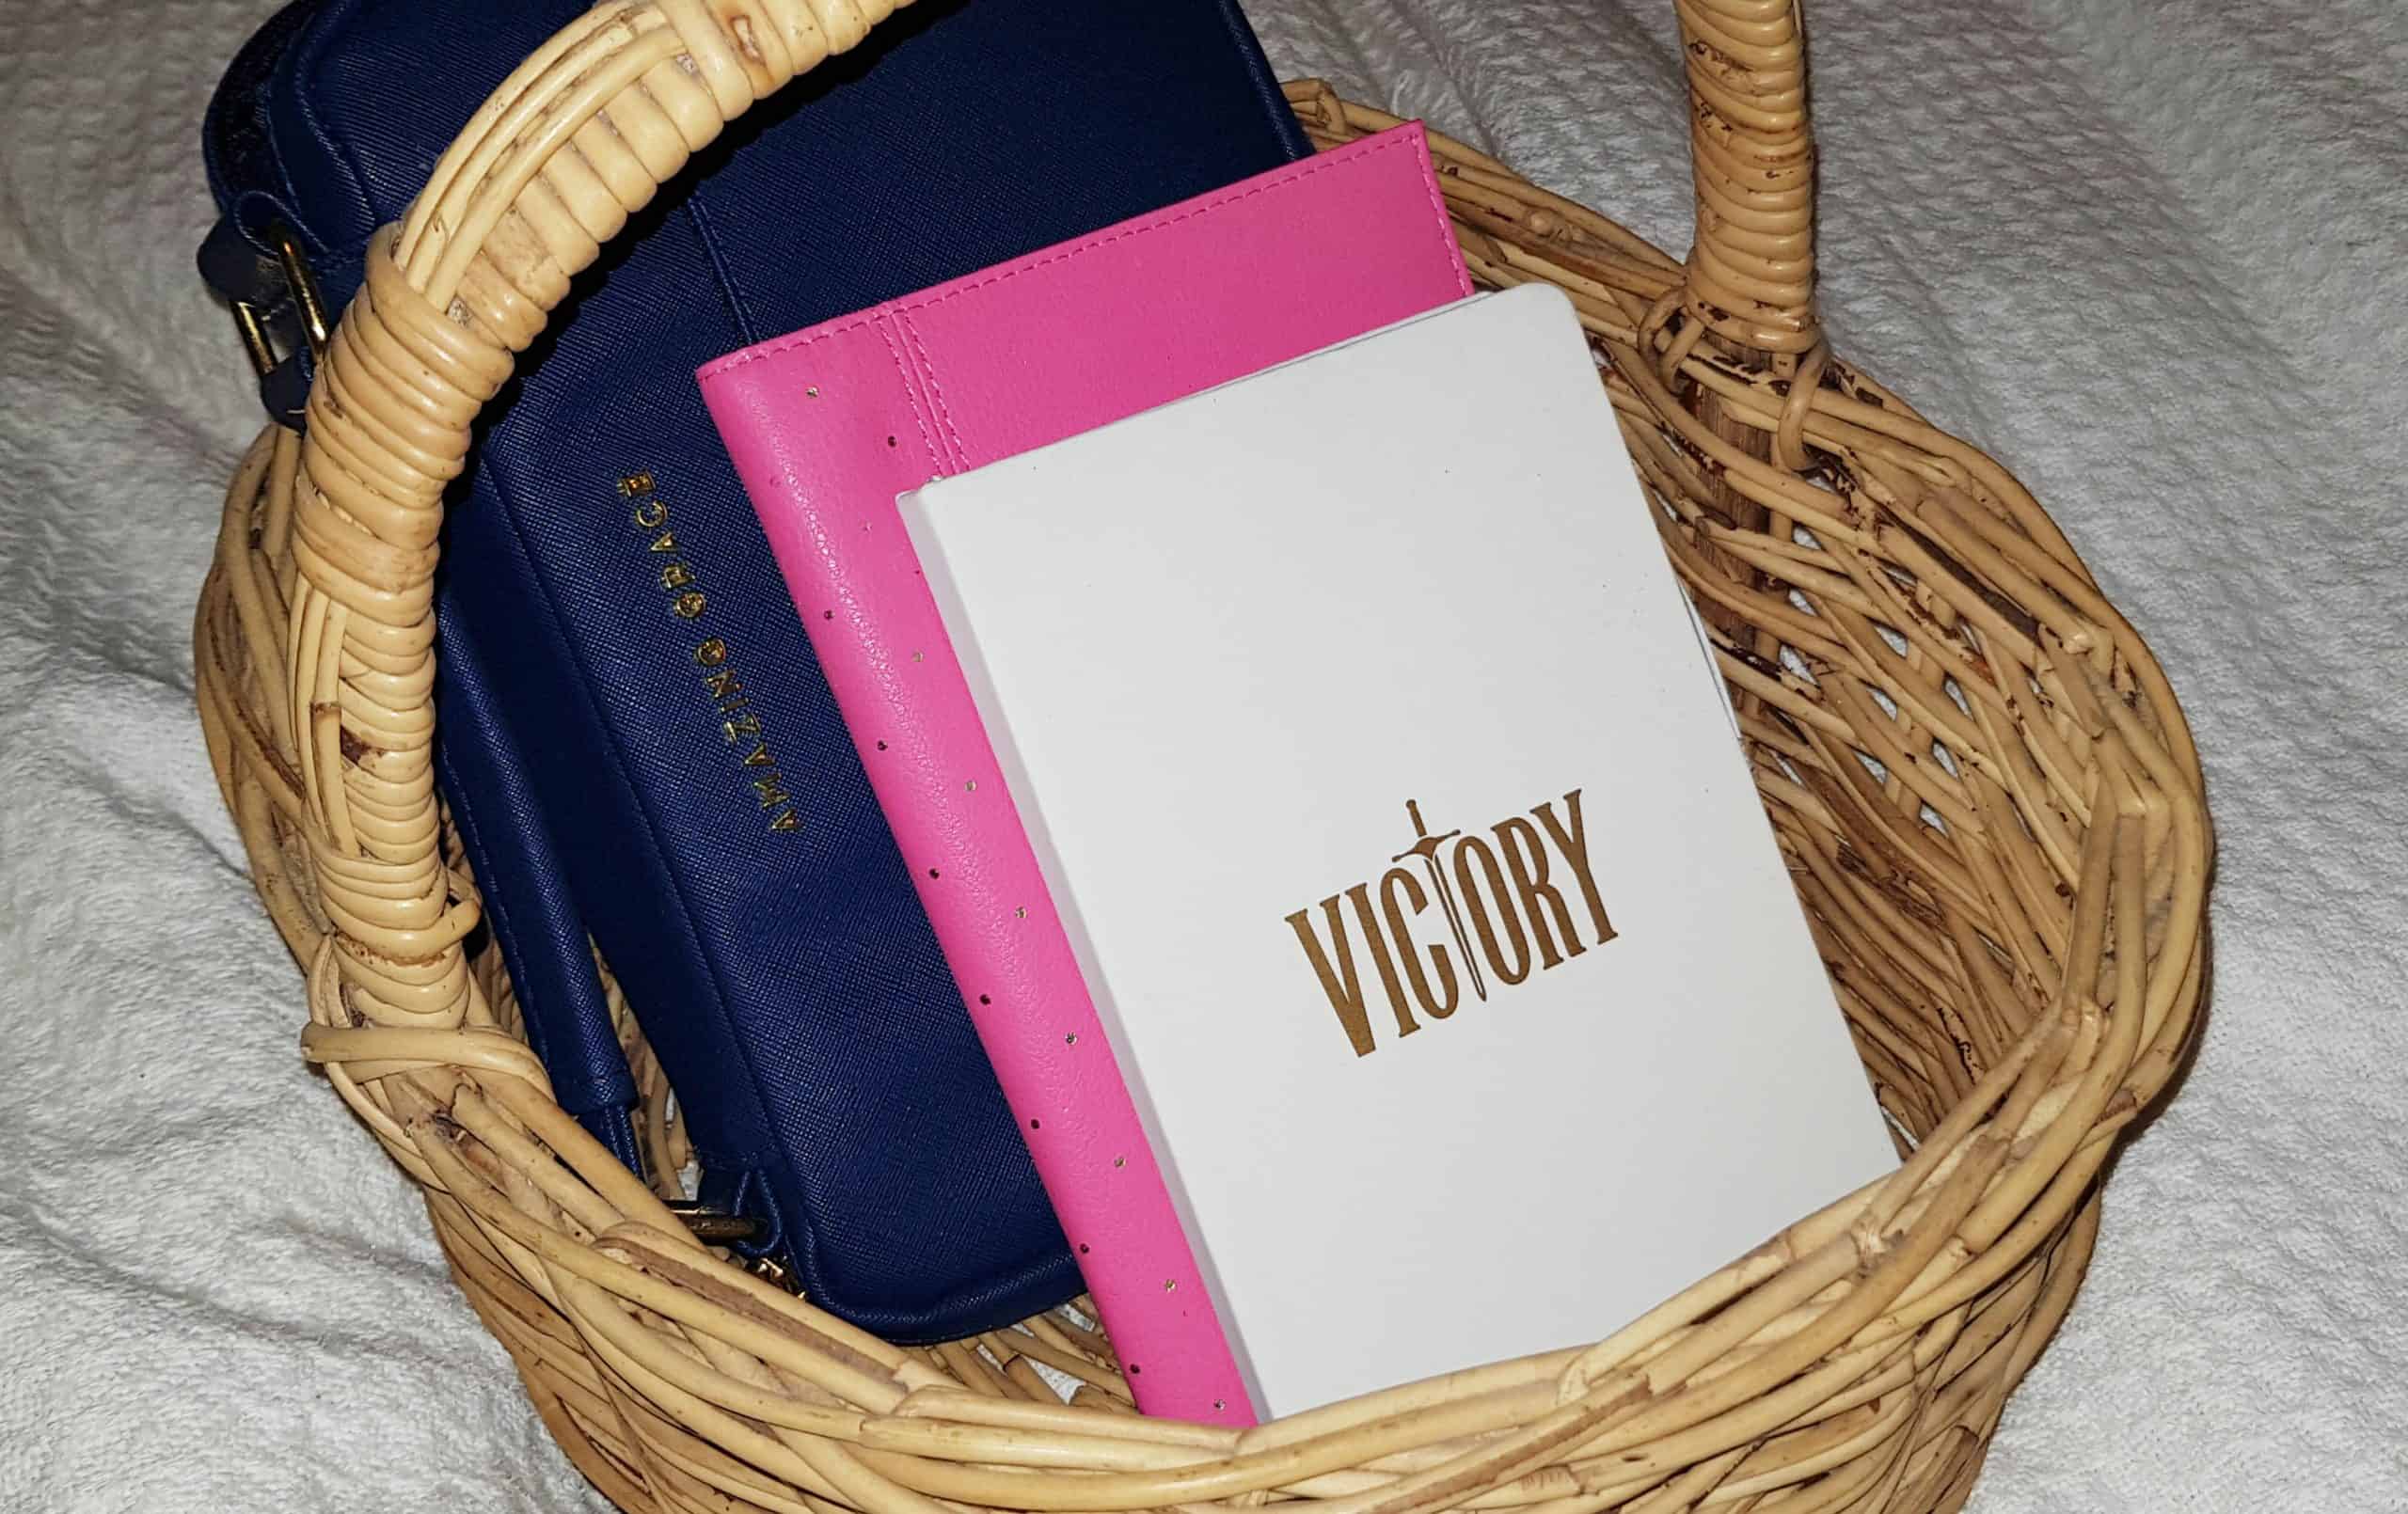 How to Create a Bible Study Basket